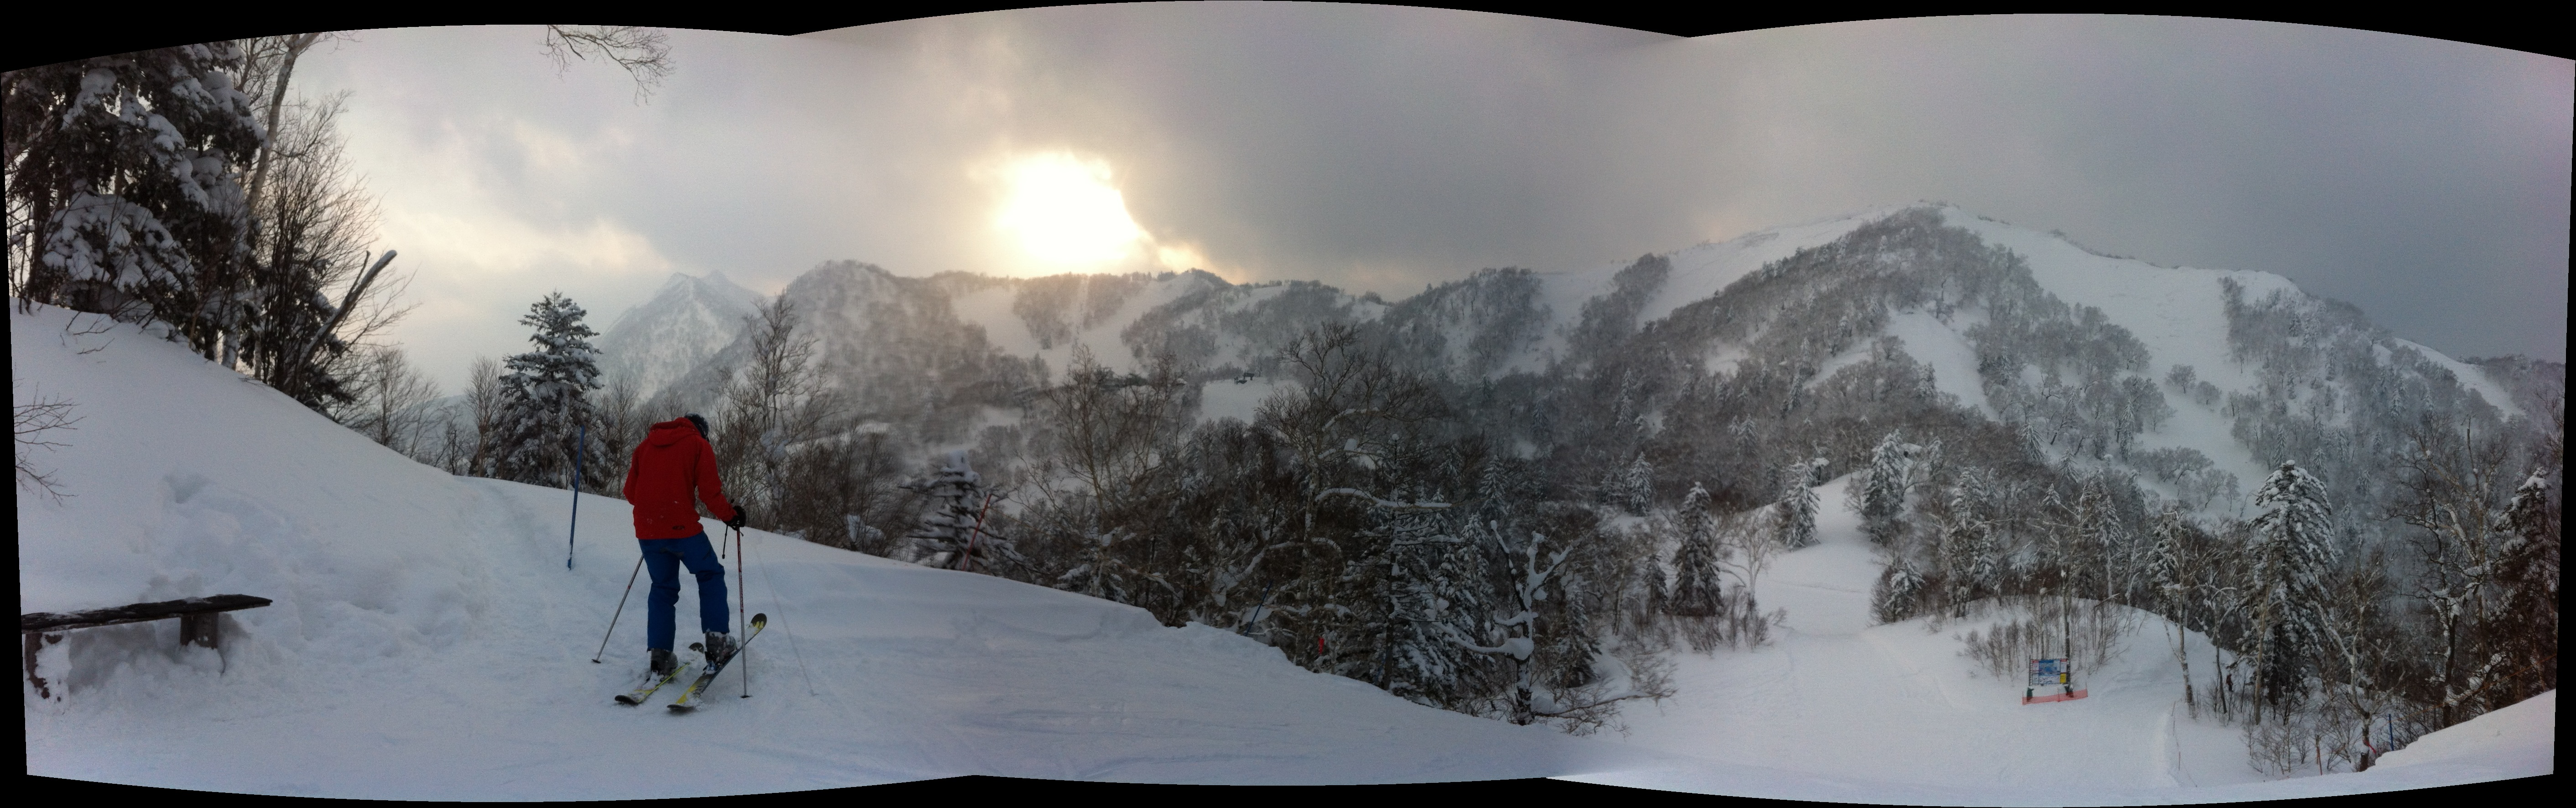 last one of the day., Furano